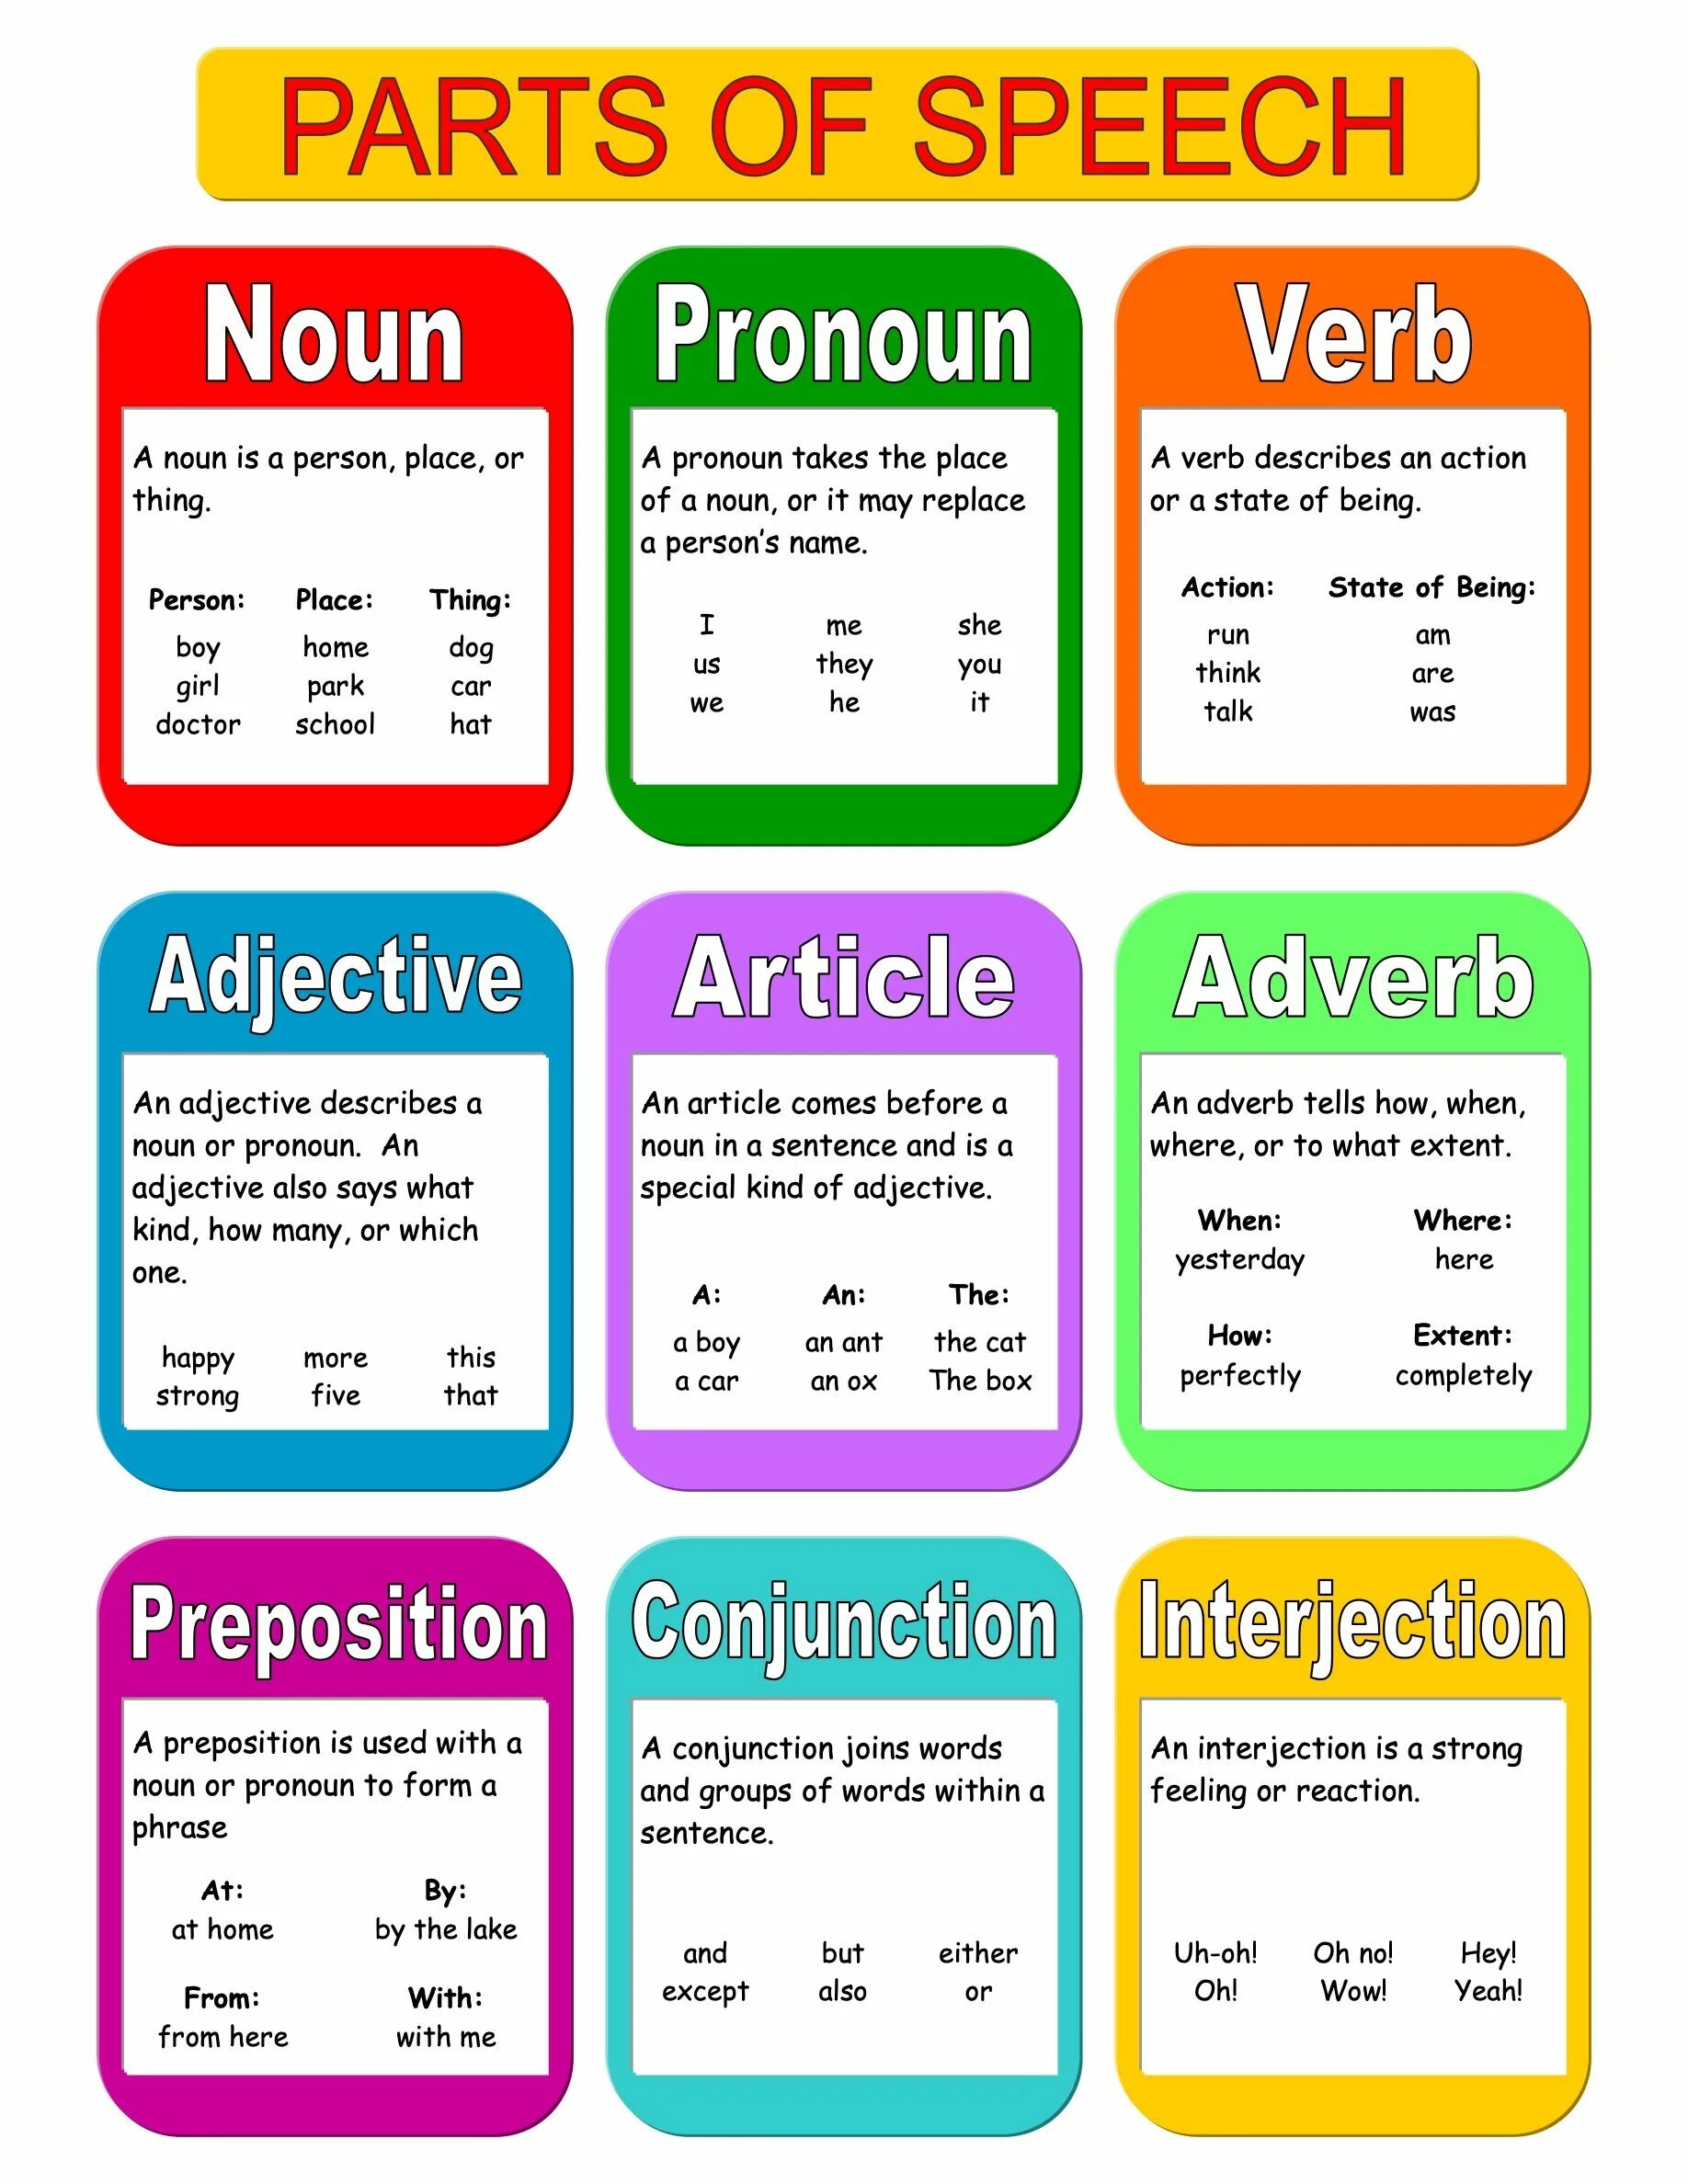 Words with prepositions list. Part of Speech таблица. Parts of Speech in English. Parts of Speech in English с переводом. Грамматика.